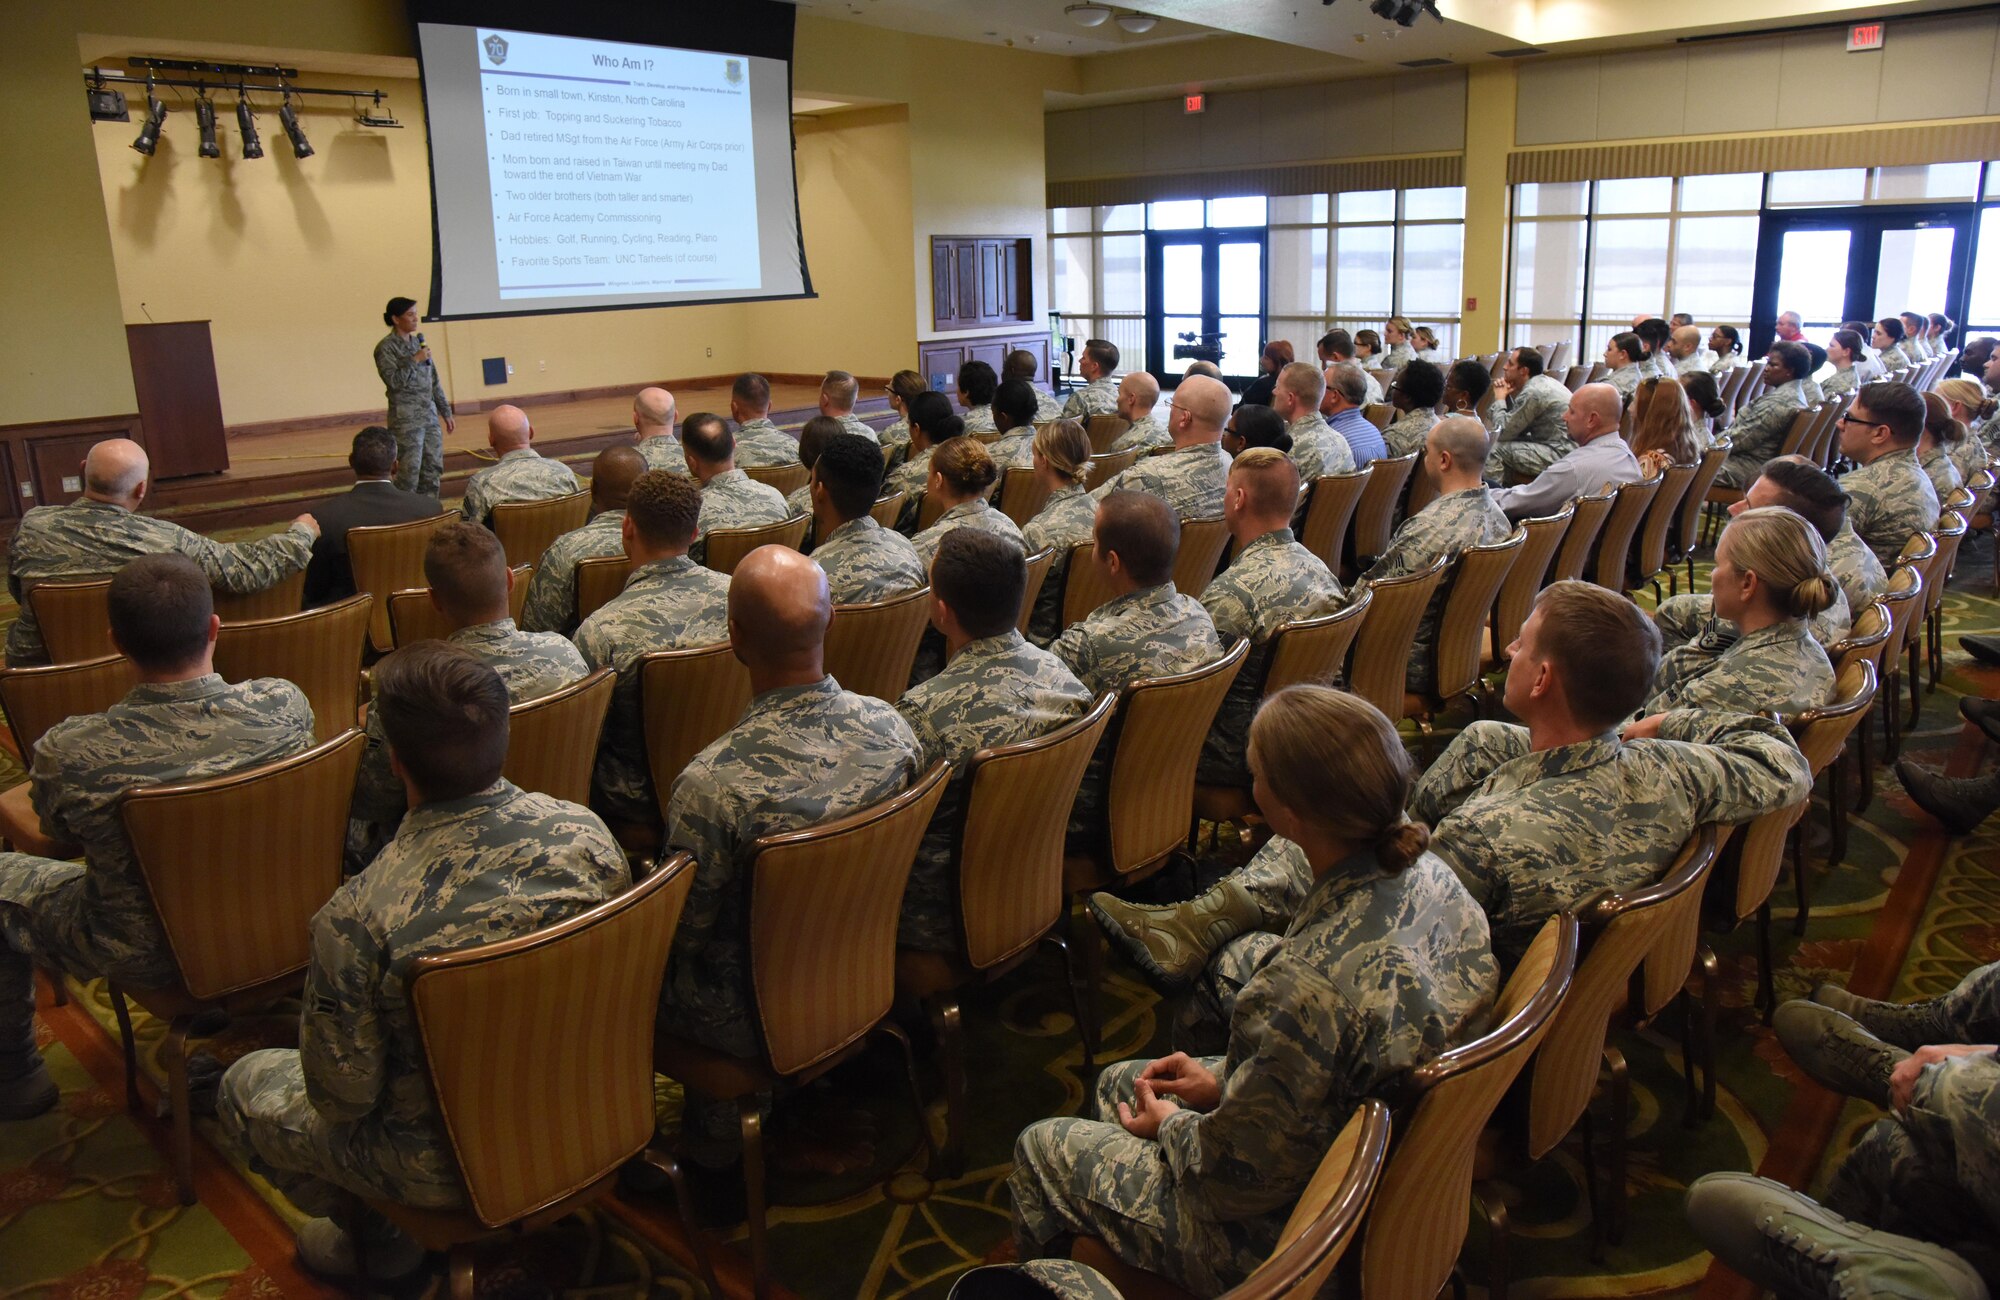 Col. Debra Lovette, 81st Training Wing commander, speaks to Airmen during a Commander’s Call in the Bay Breeze Event Center June 12, 2017, on Keesler Air Force Base, Miss. The Commander’s Call was one of several Wingman Week events focusing on resiliency and teambuilding initiatives across the base. (U.S. Air Force photo by Kemberly Groue)